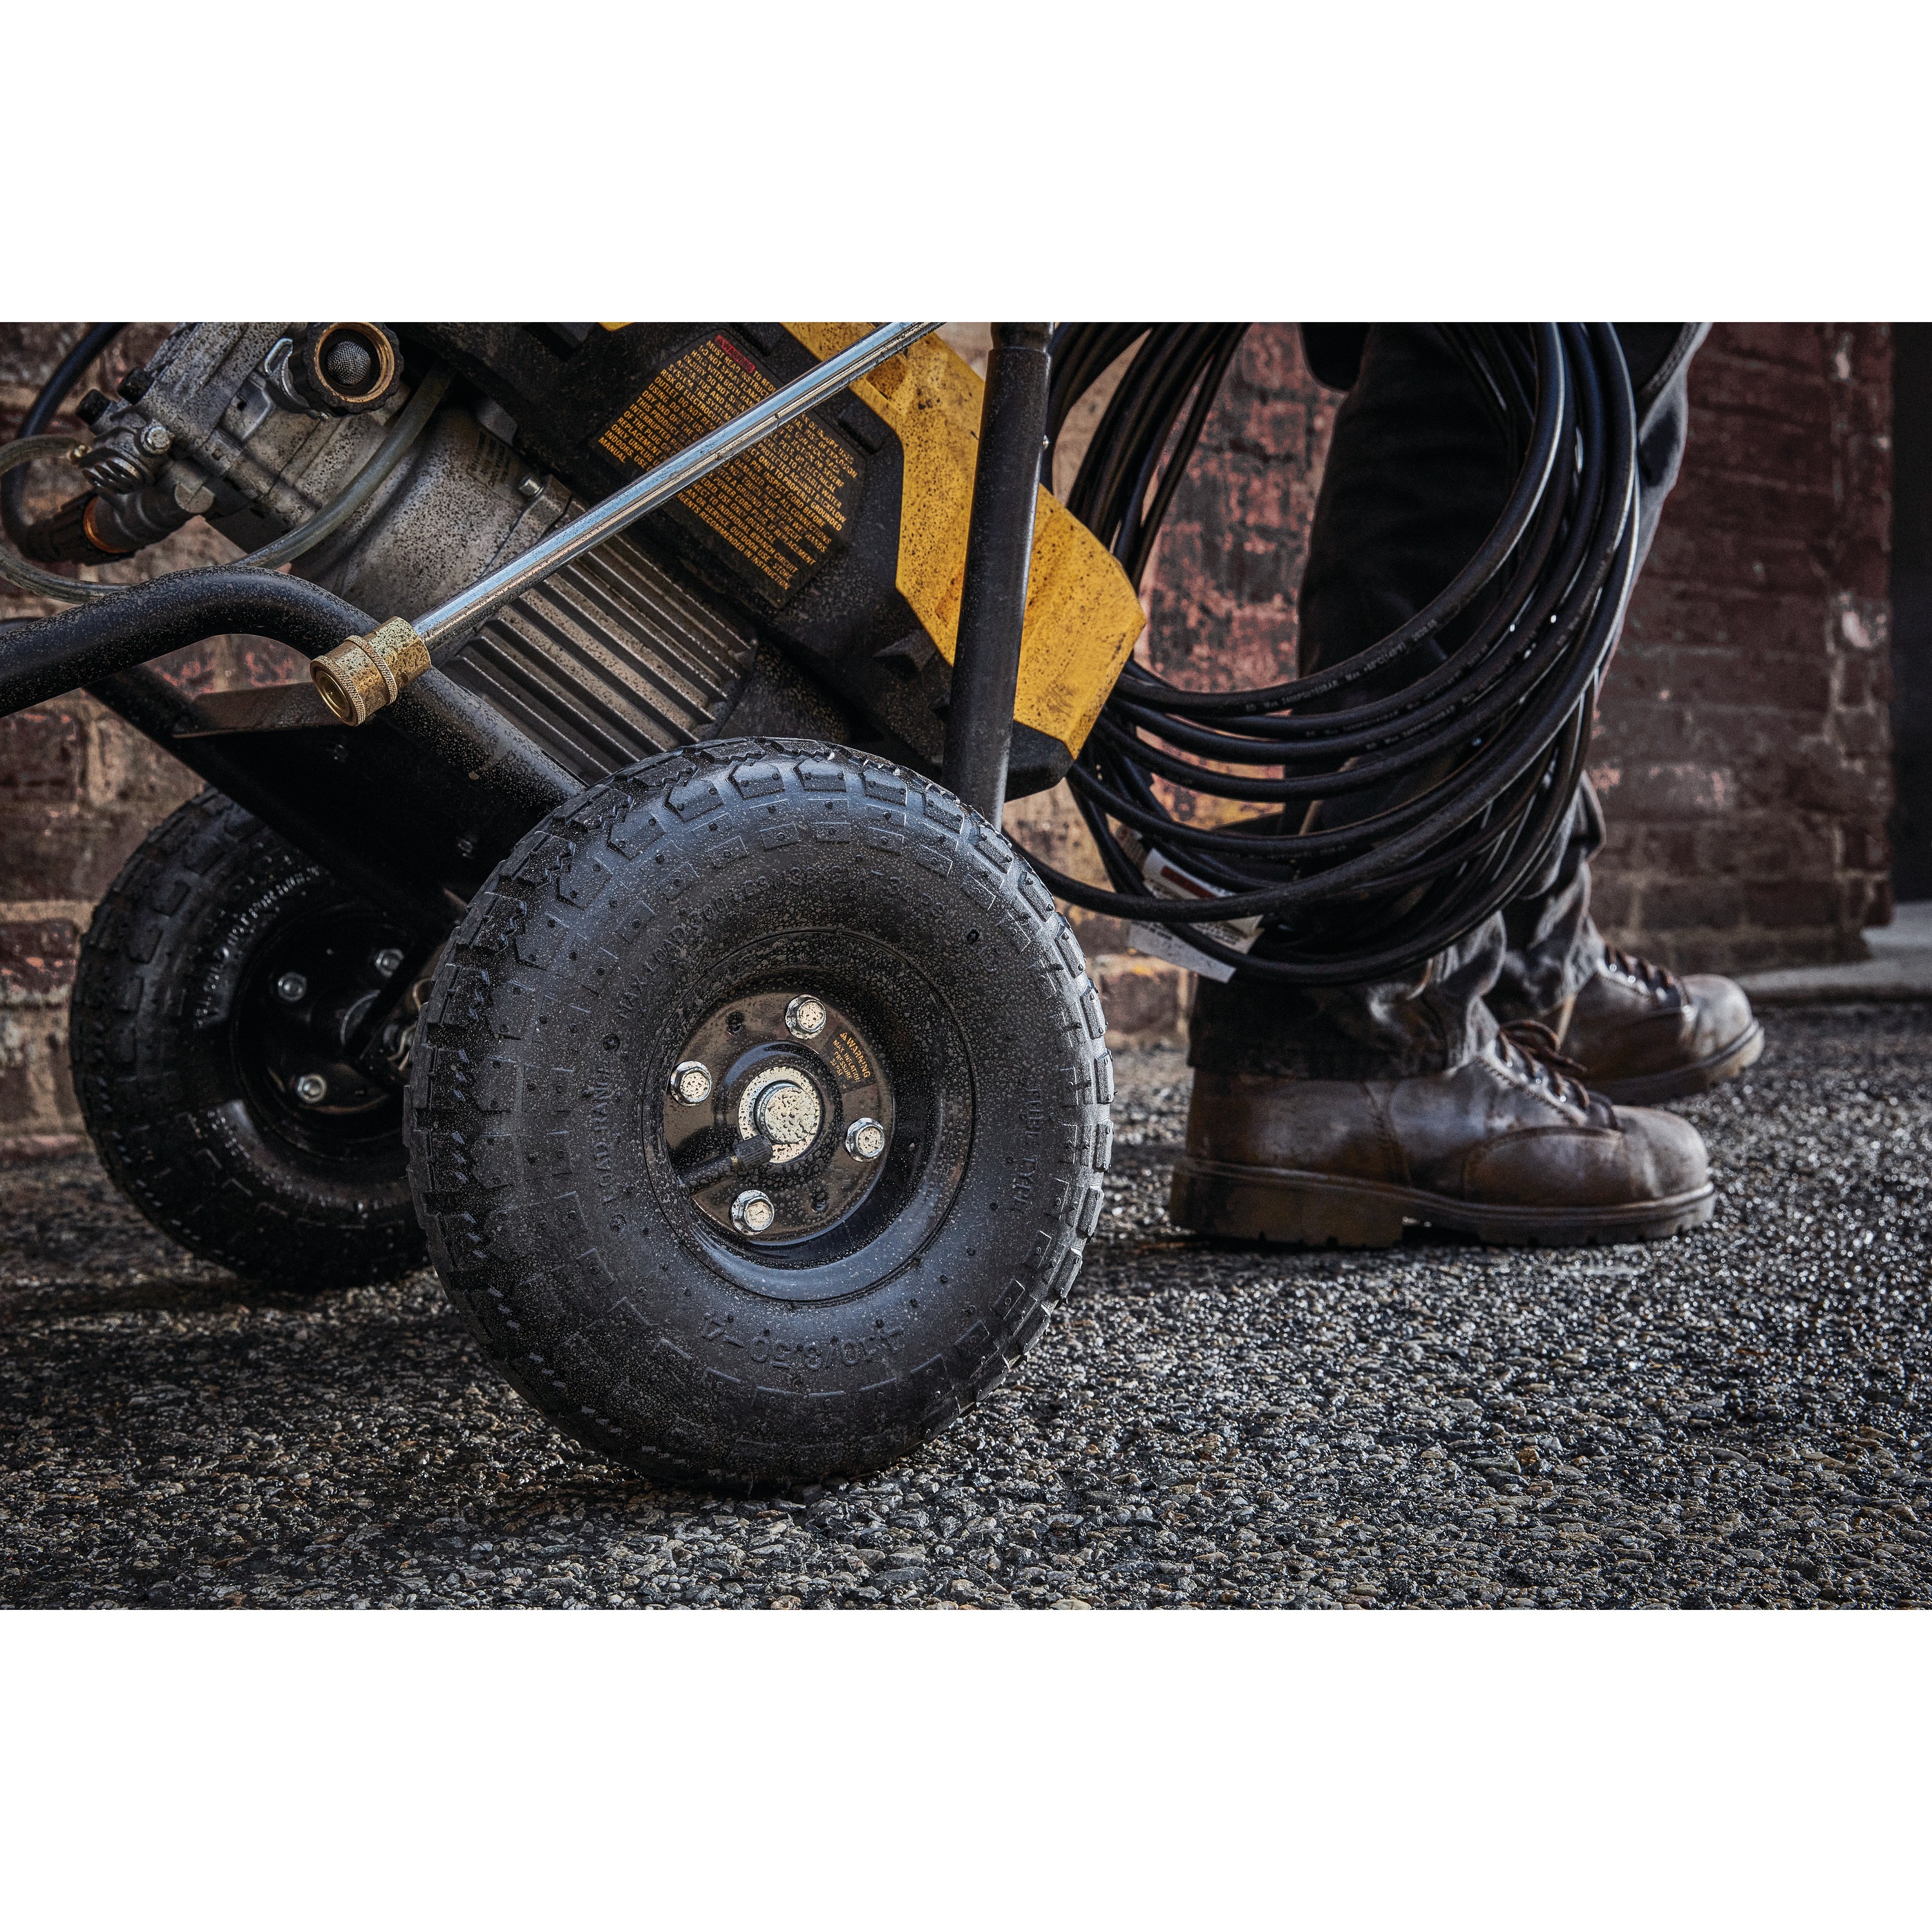 Premium pneumatic wheels feature of electric cold water pressure washer.